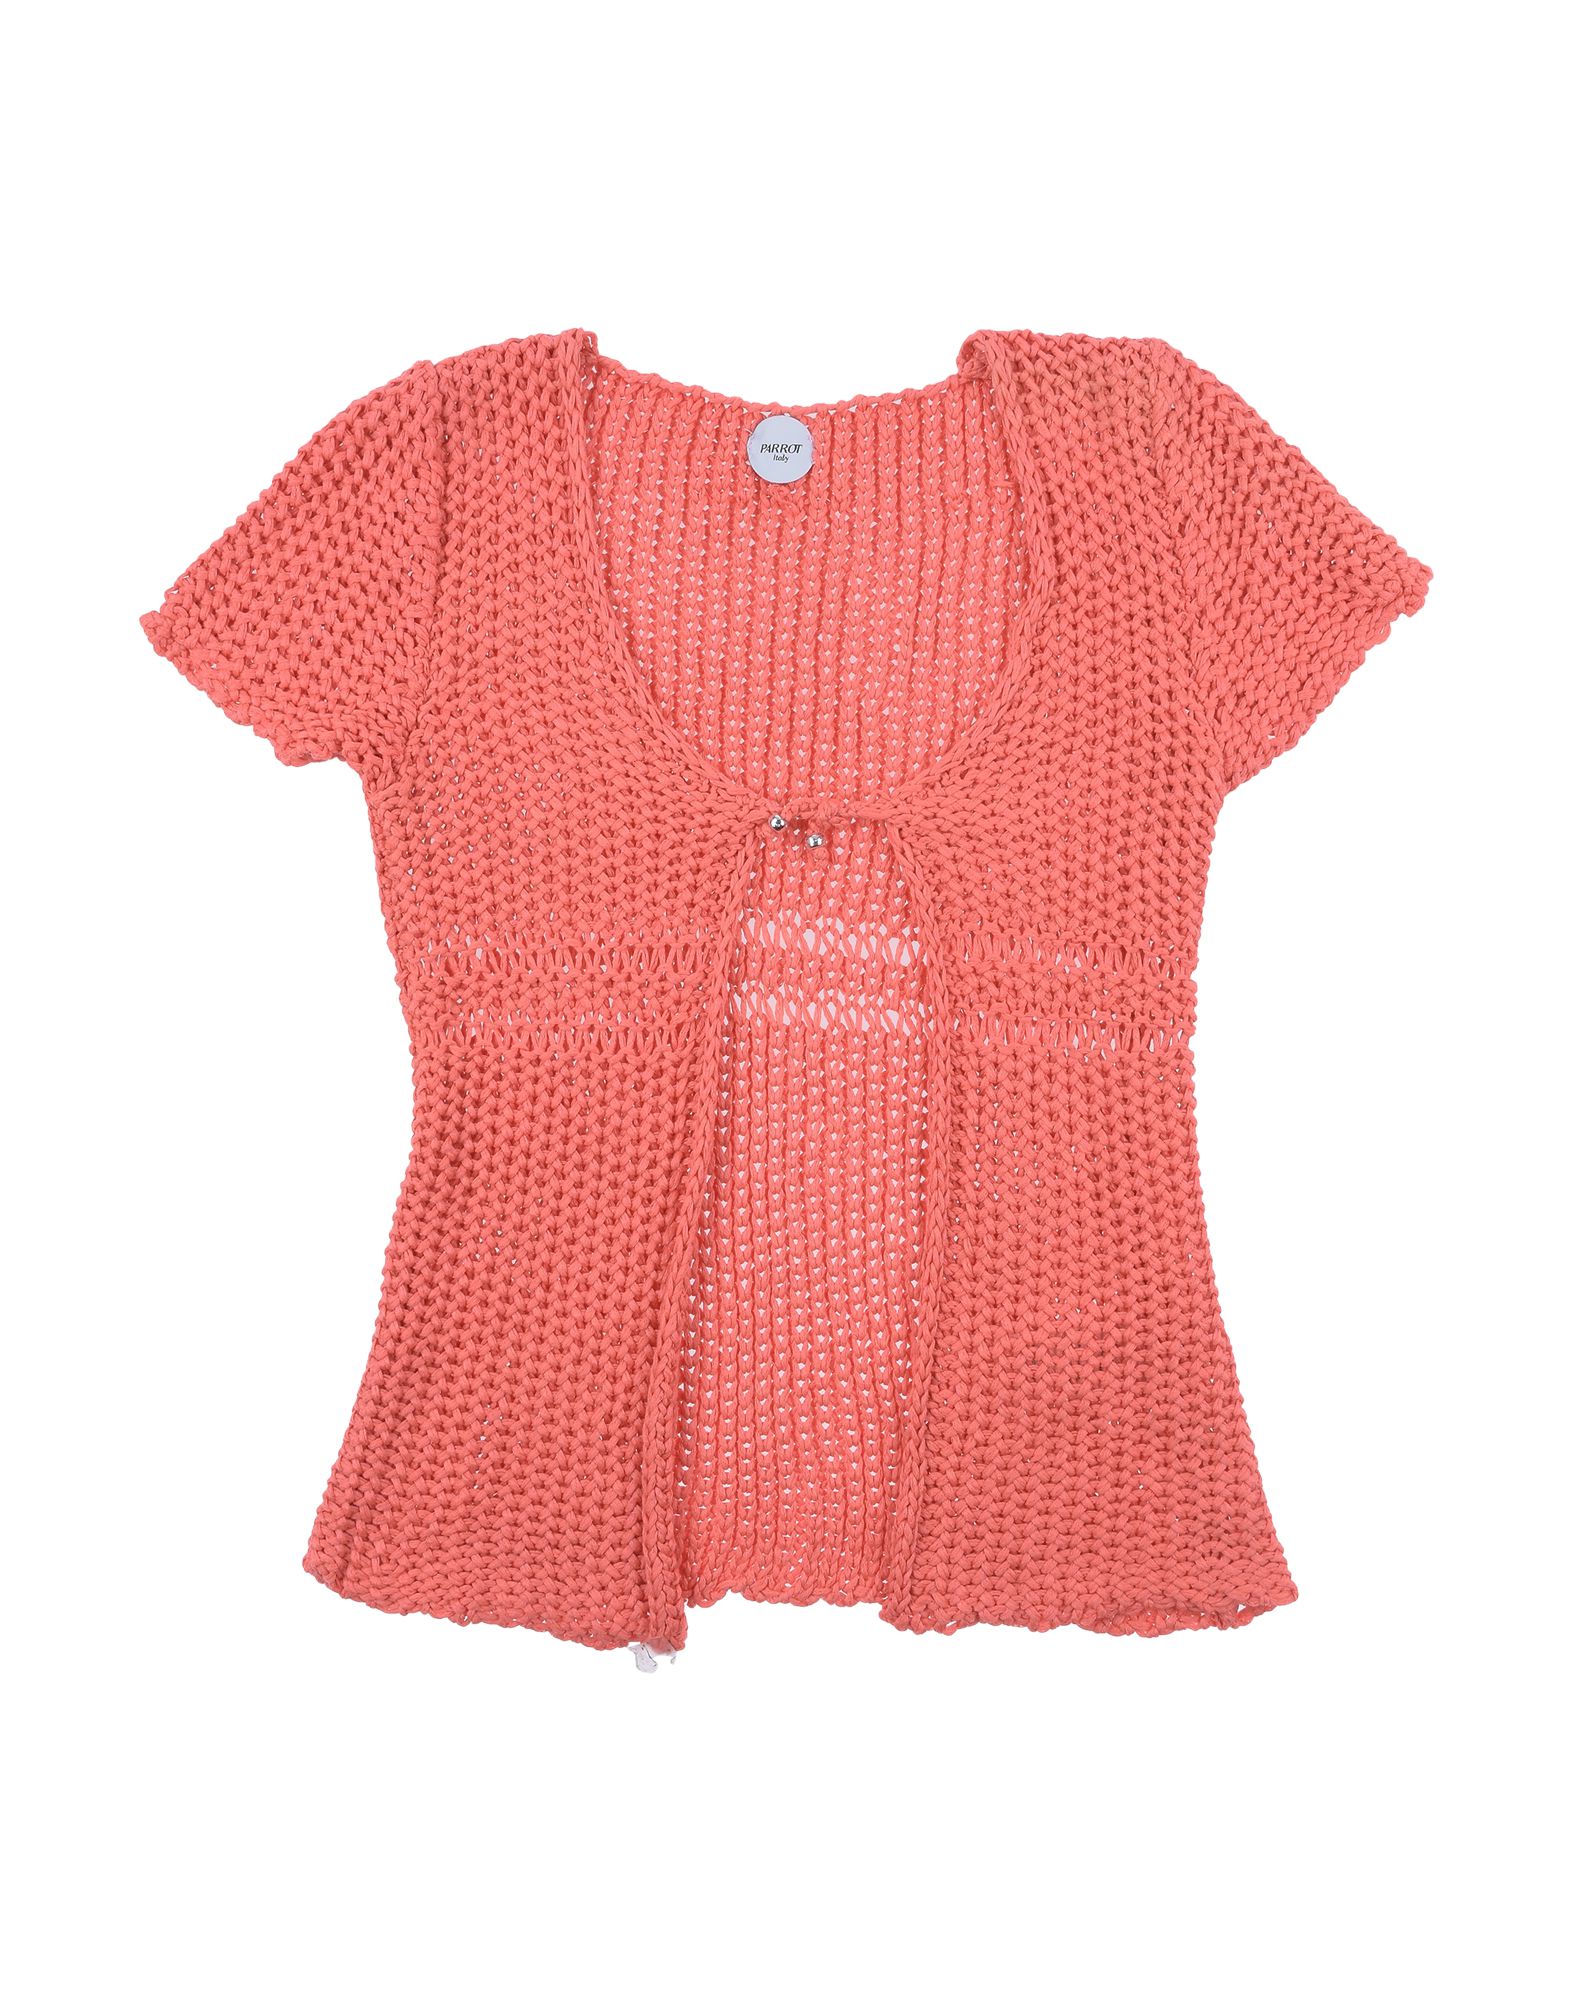 Parrot Kids' Cardigans In Coral